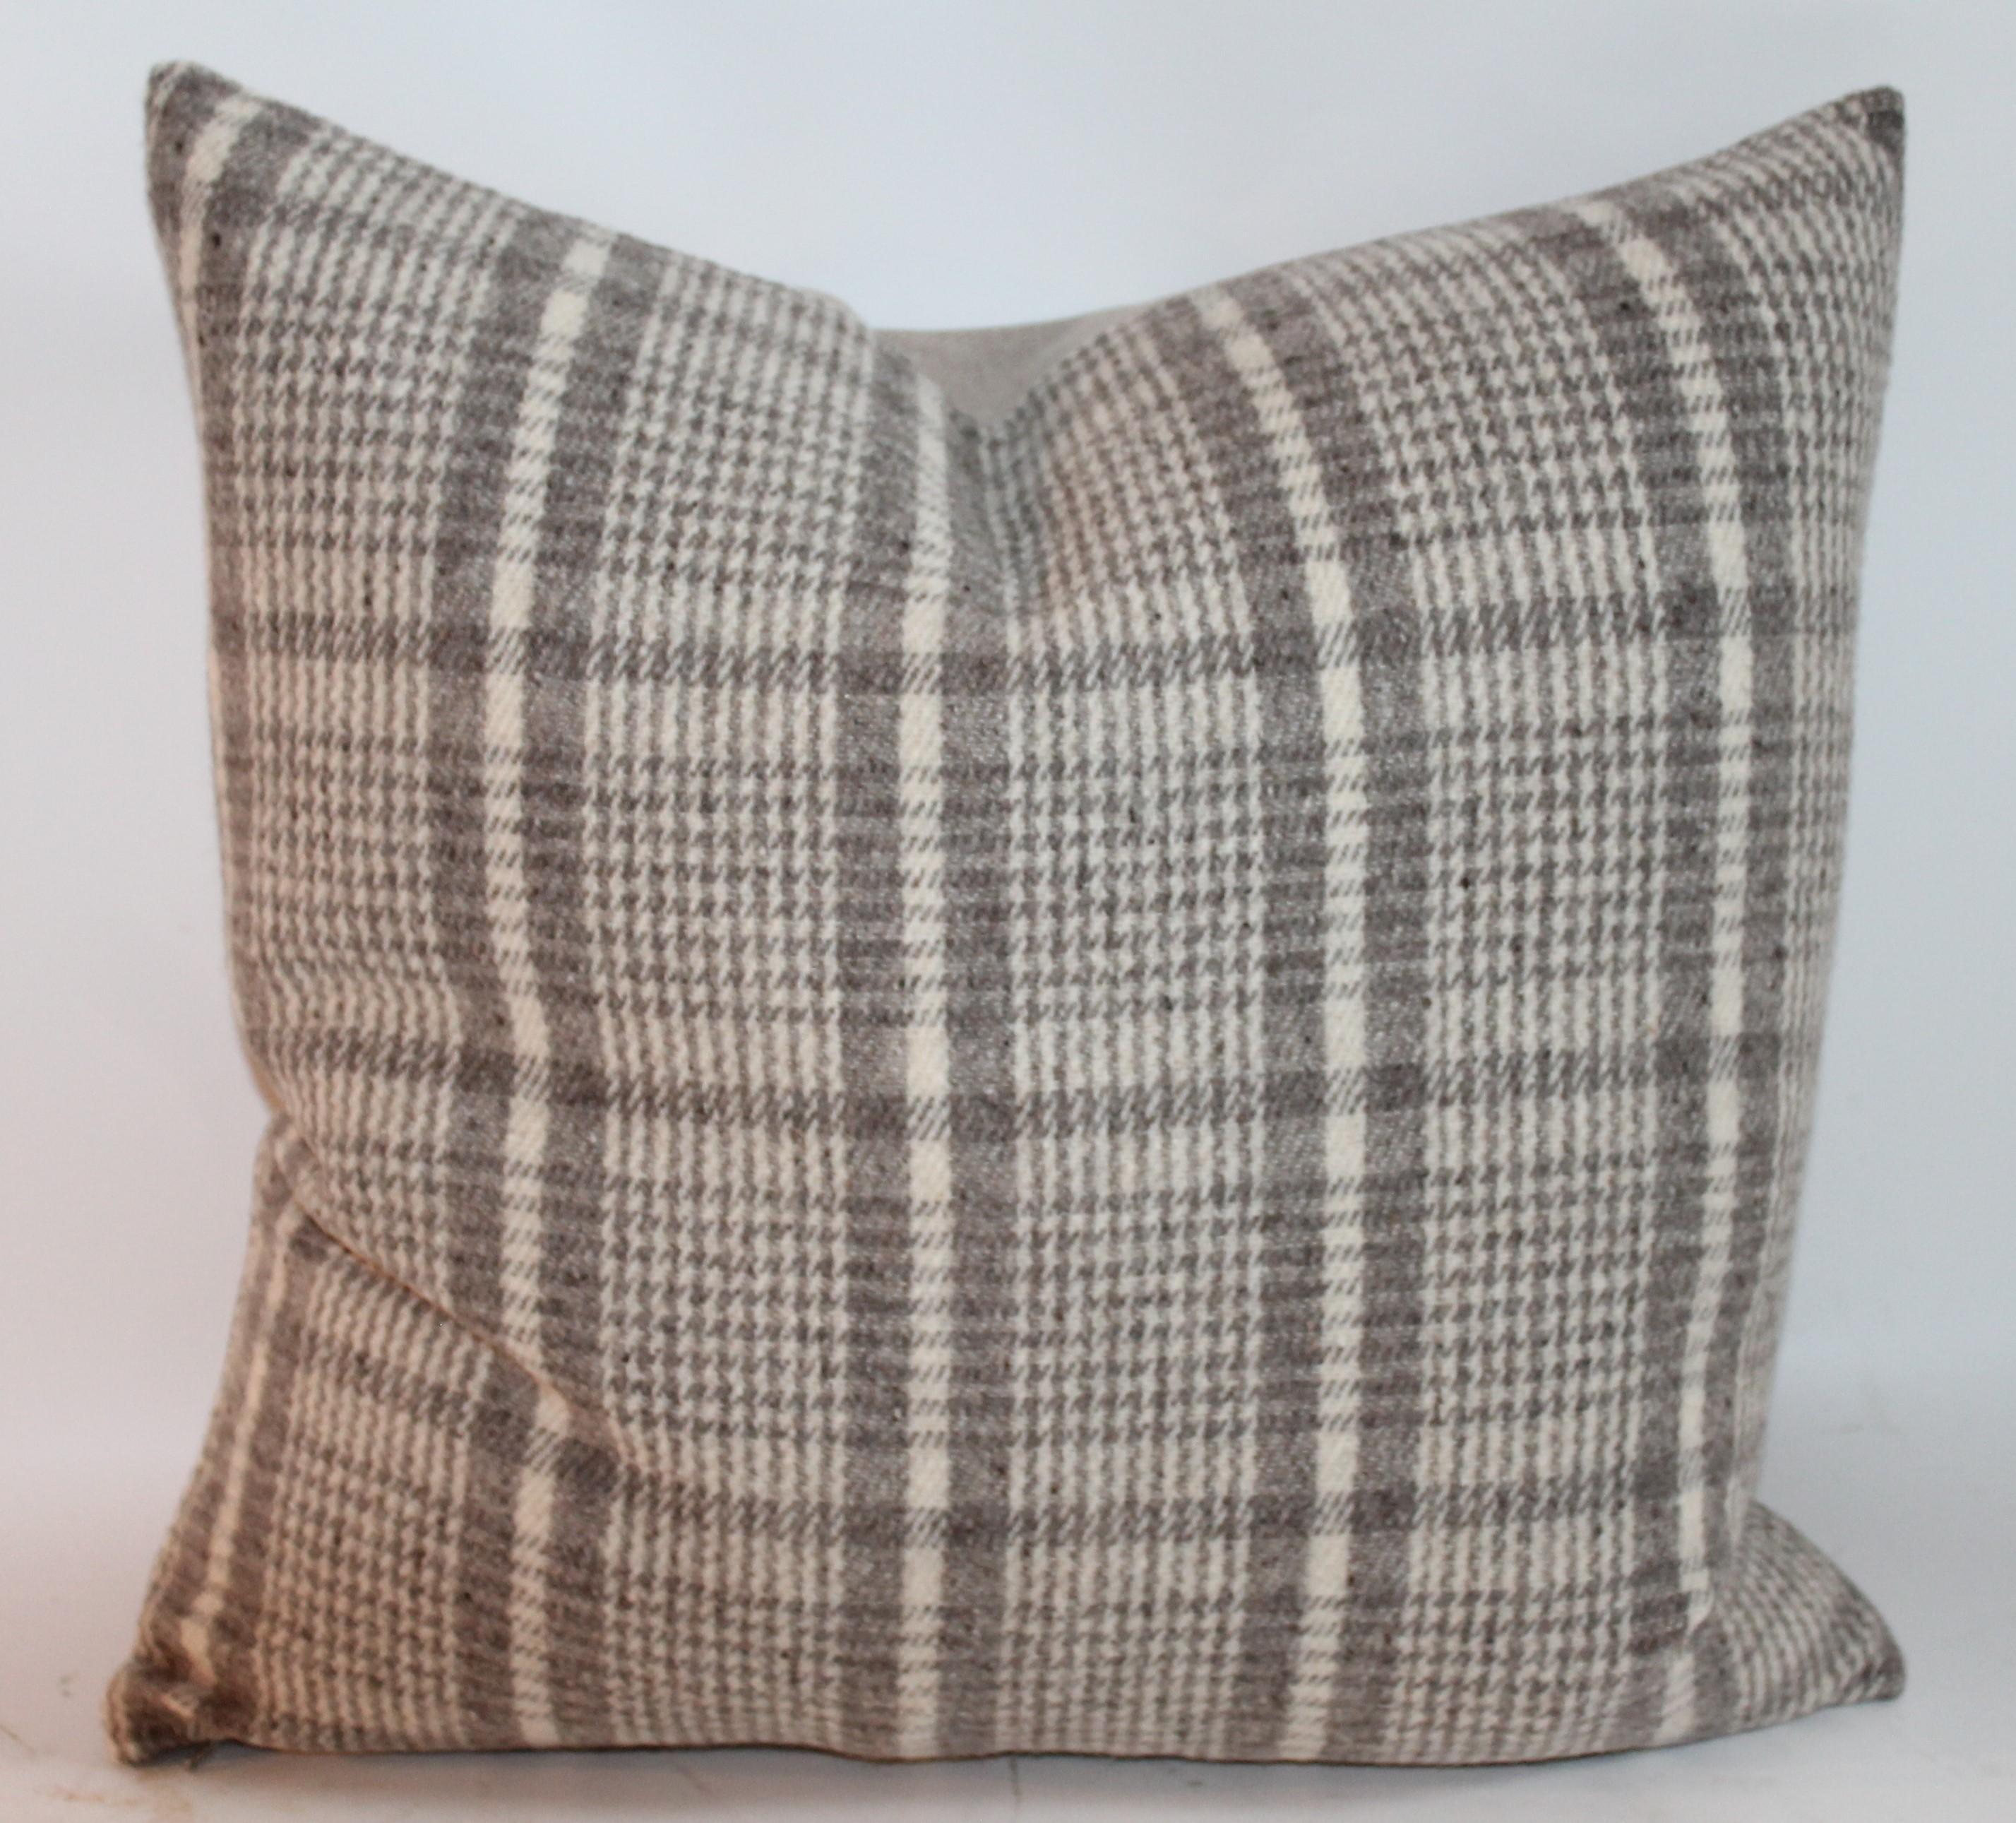 Handwoven Saddle Blanket Pillows, Four In Excellent Condition For Sale In Los Angeles, CA